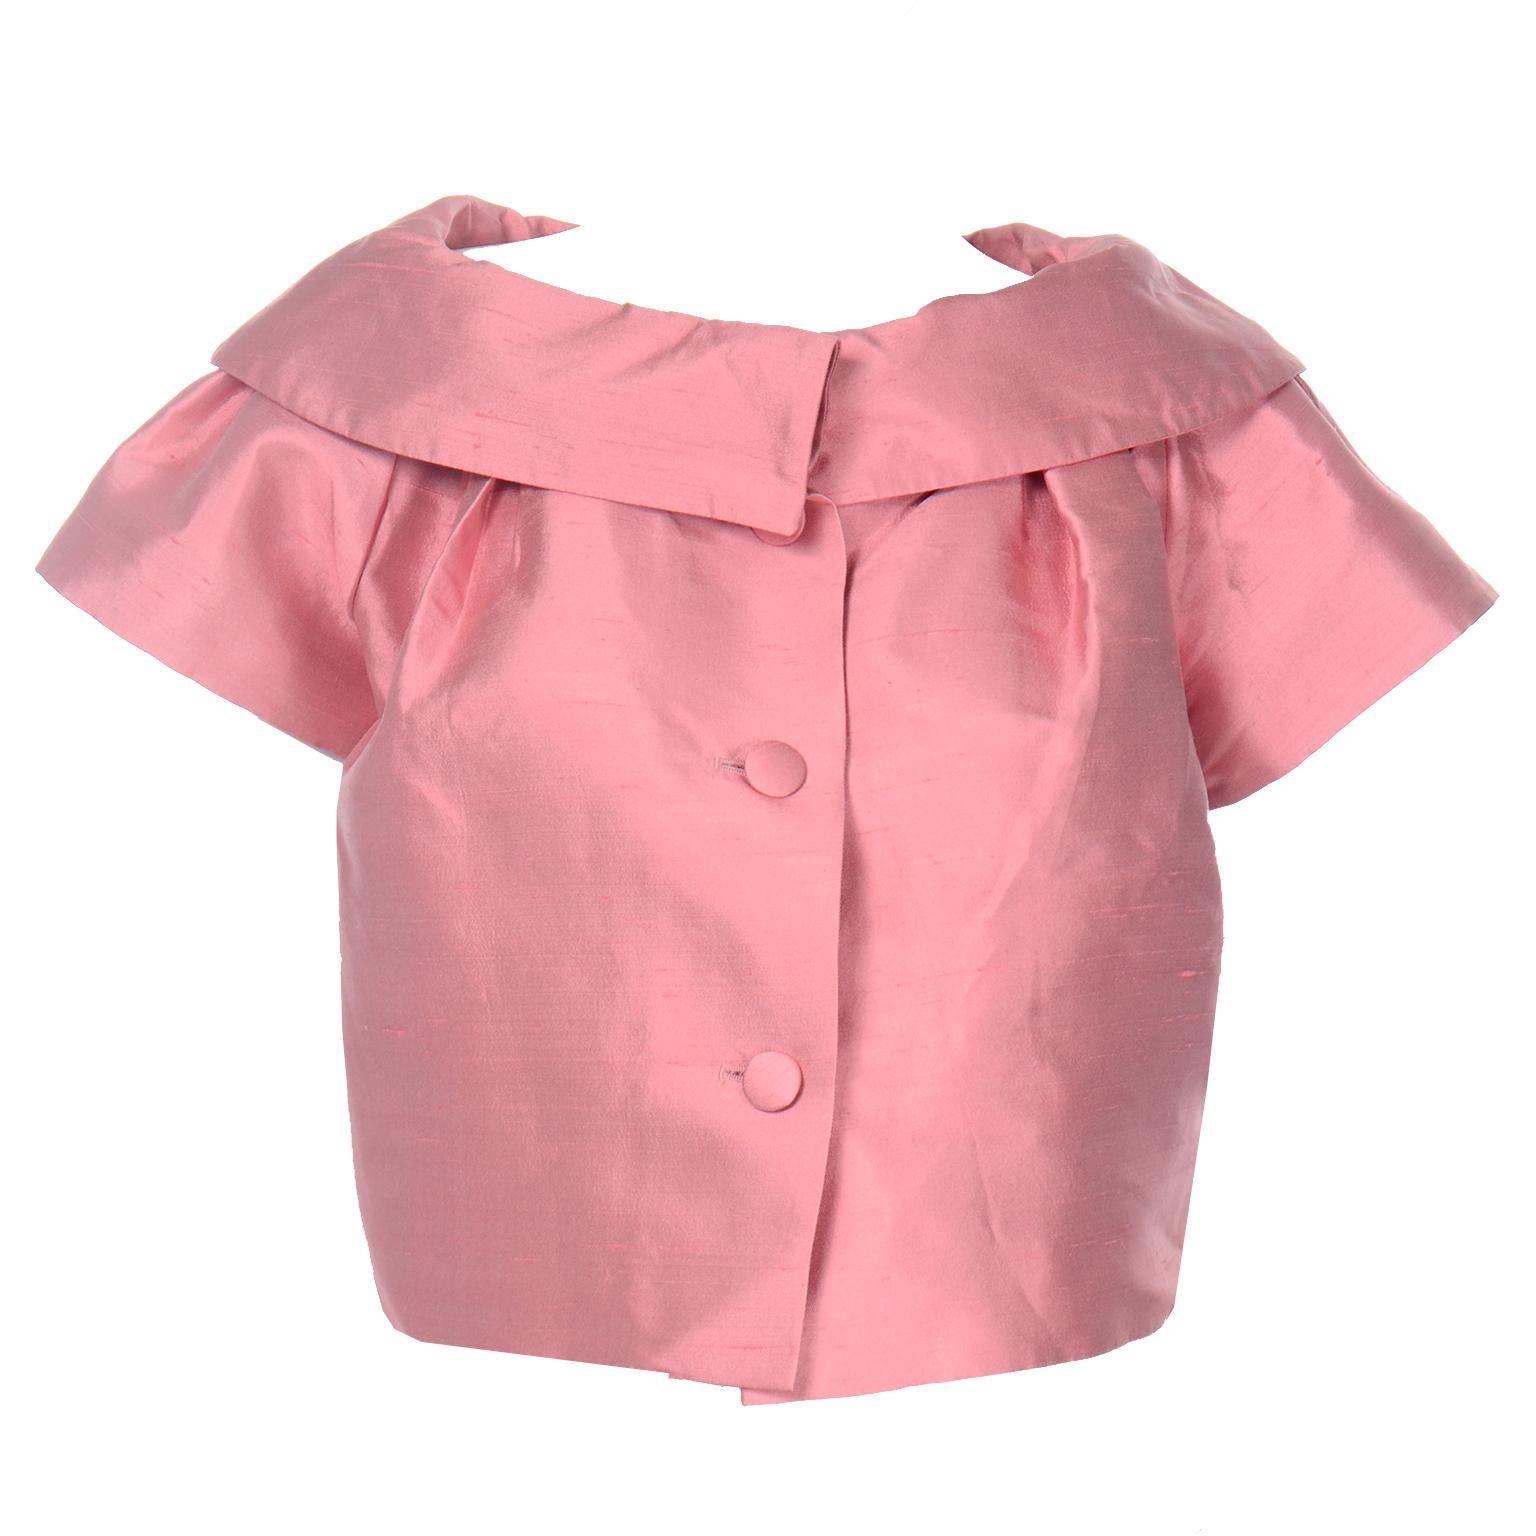 John Galliano for Christian Dior 1960s Inspired Pink 2008 Vintage Jacket Top 10